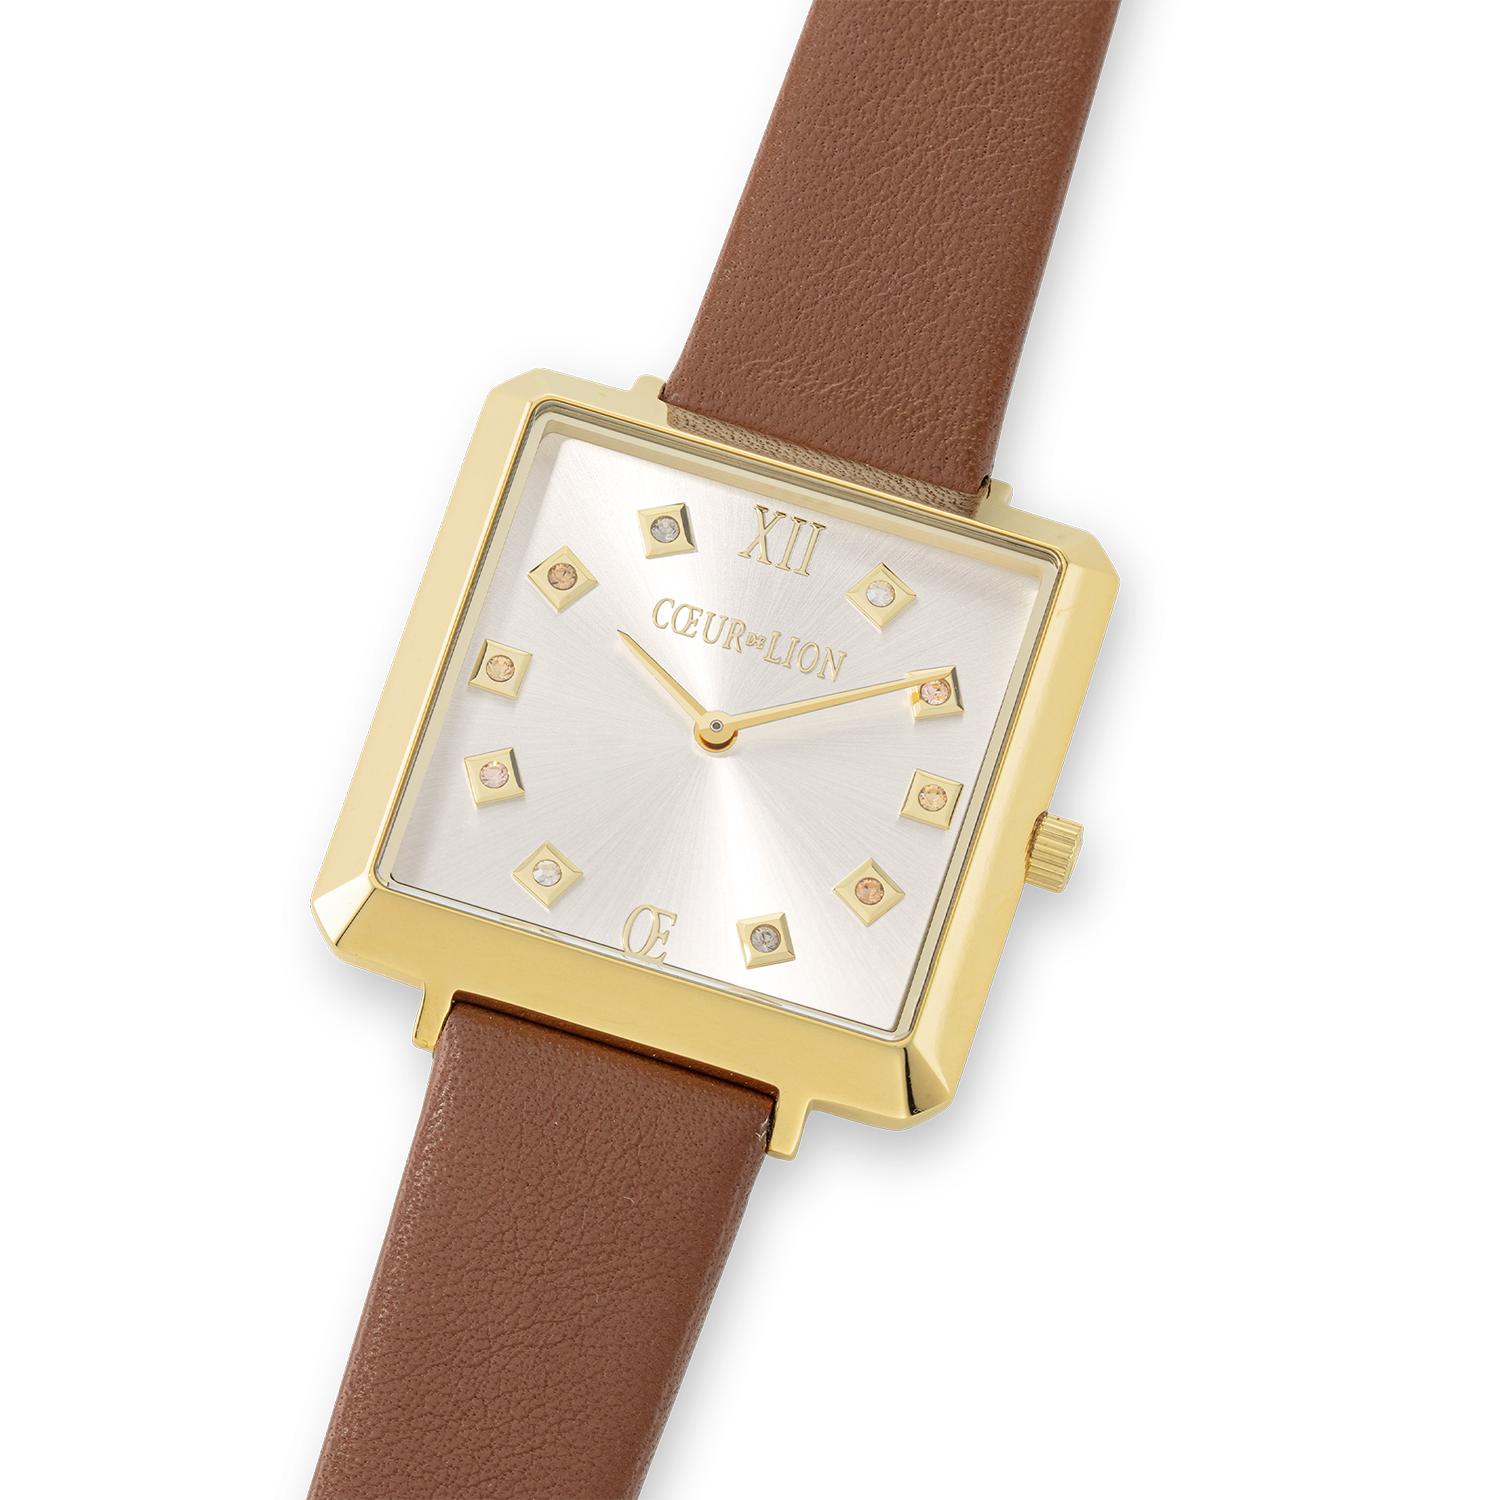 Watch Iconic Square Gold White Sunray Bracelet Leather Classy Brown